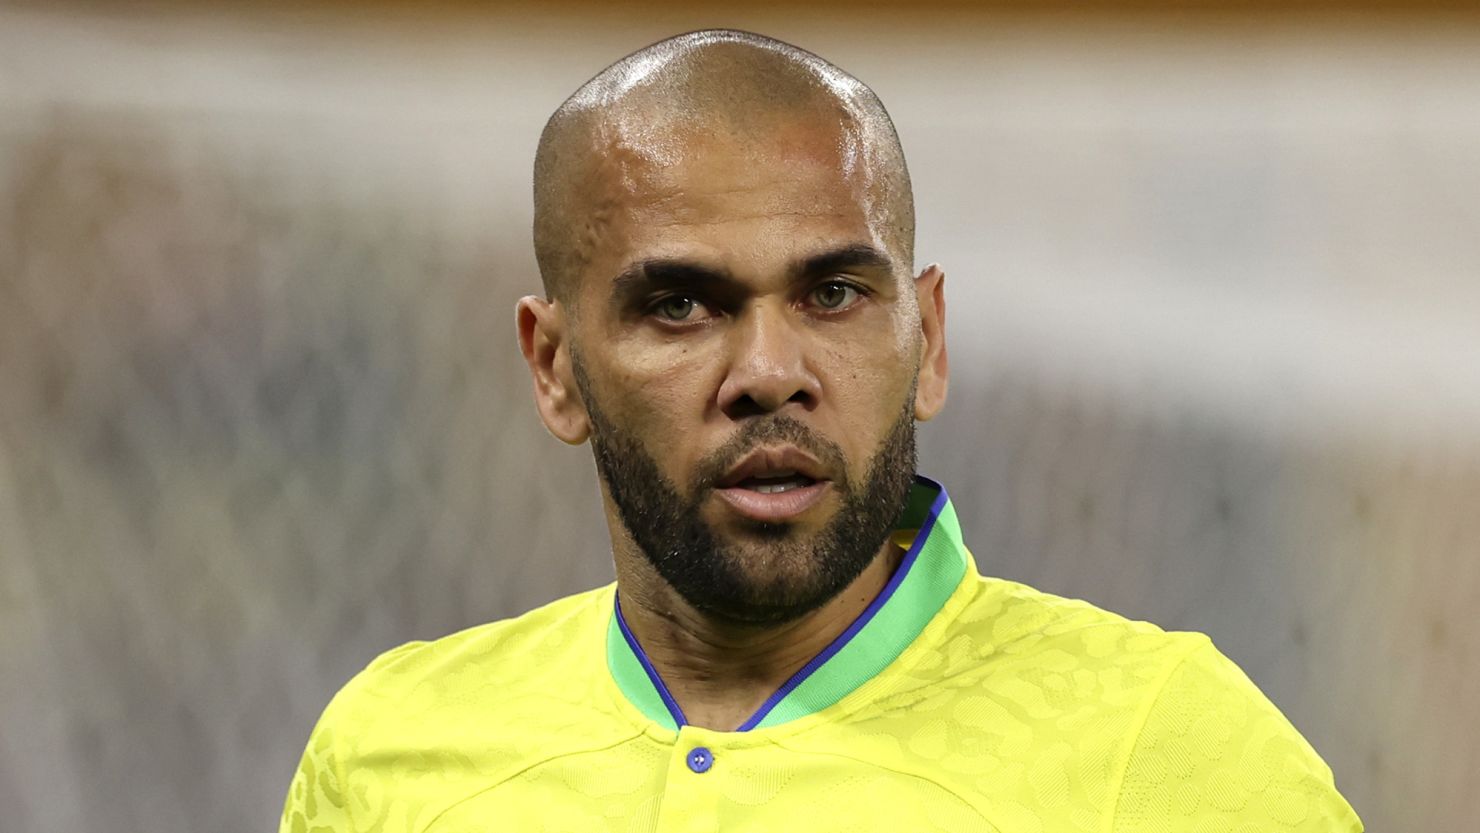 Dani Alves plays for Brazil against South Korea at 2022 Qatar World Cup.